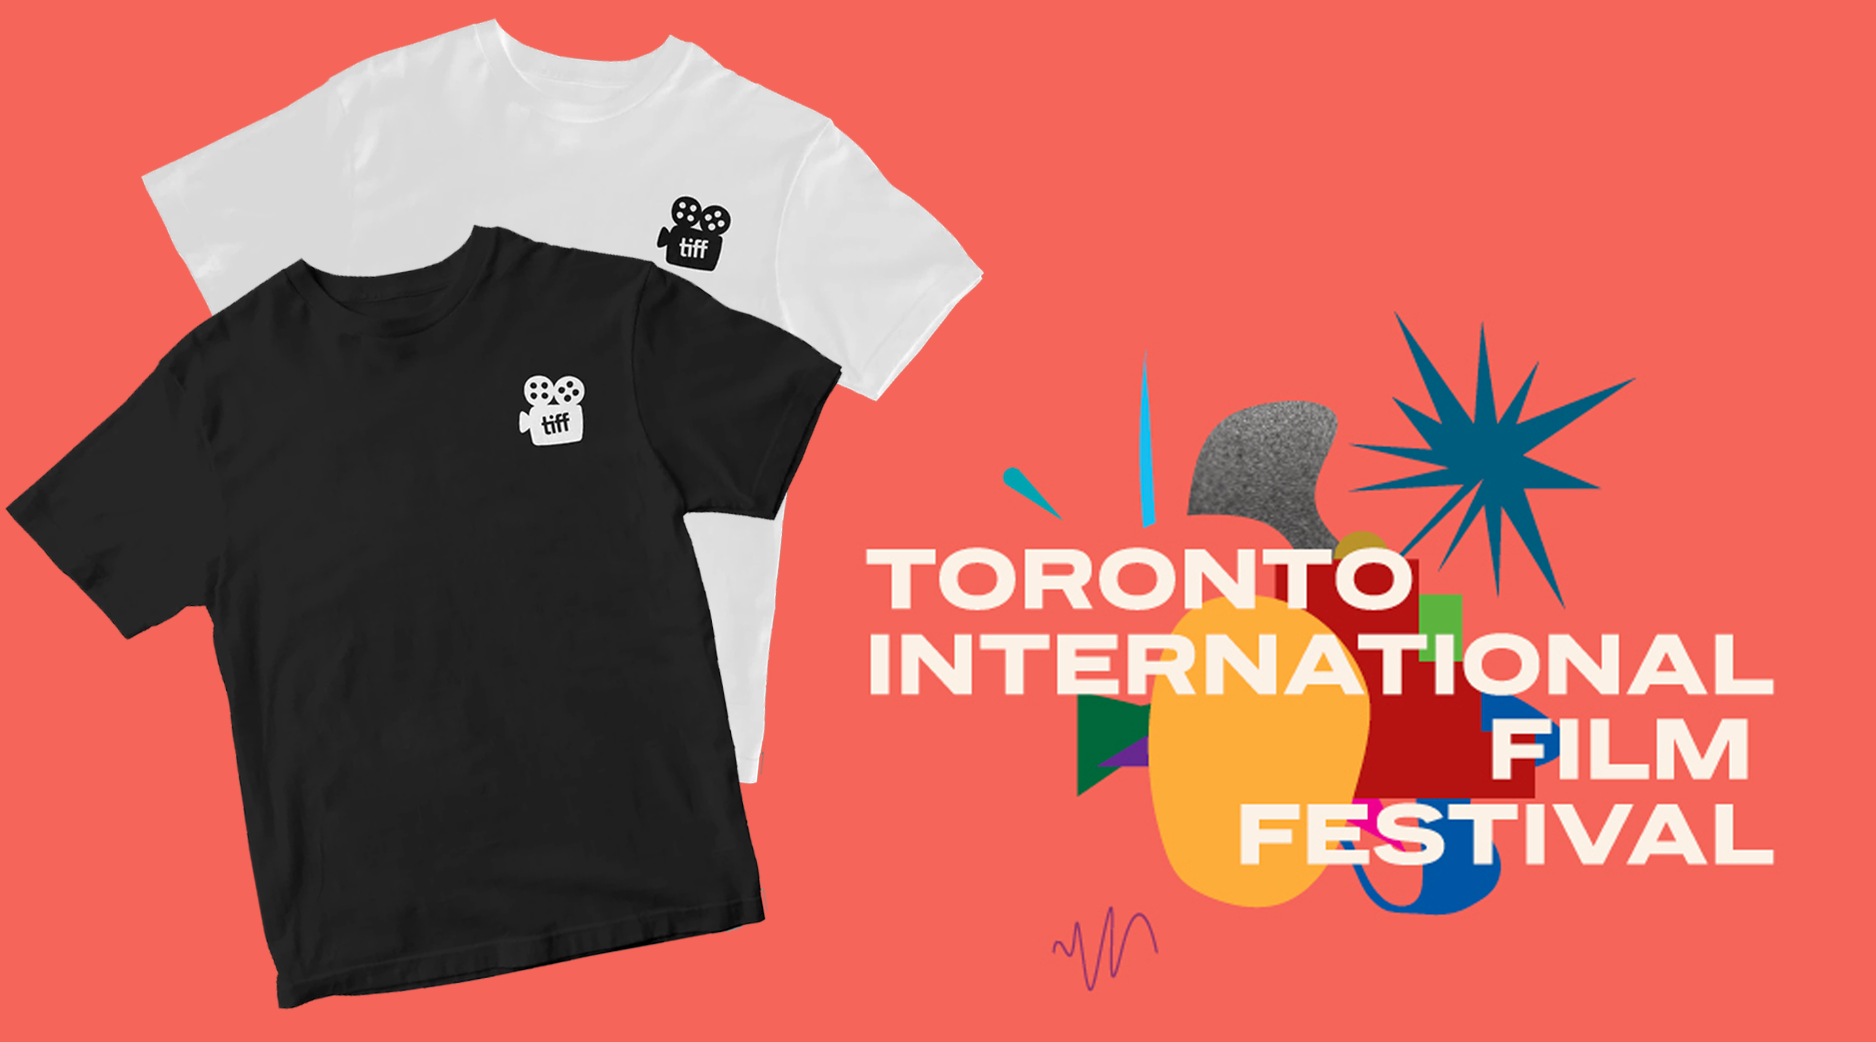 Toronto film festivals with their own branded t-shirts and apparel